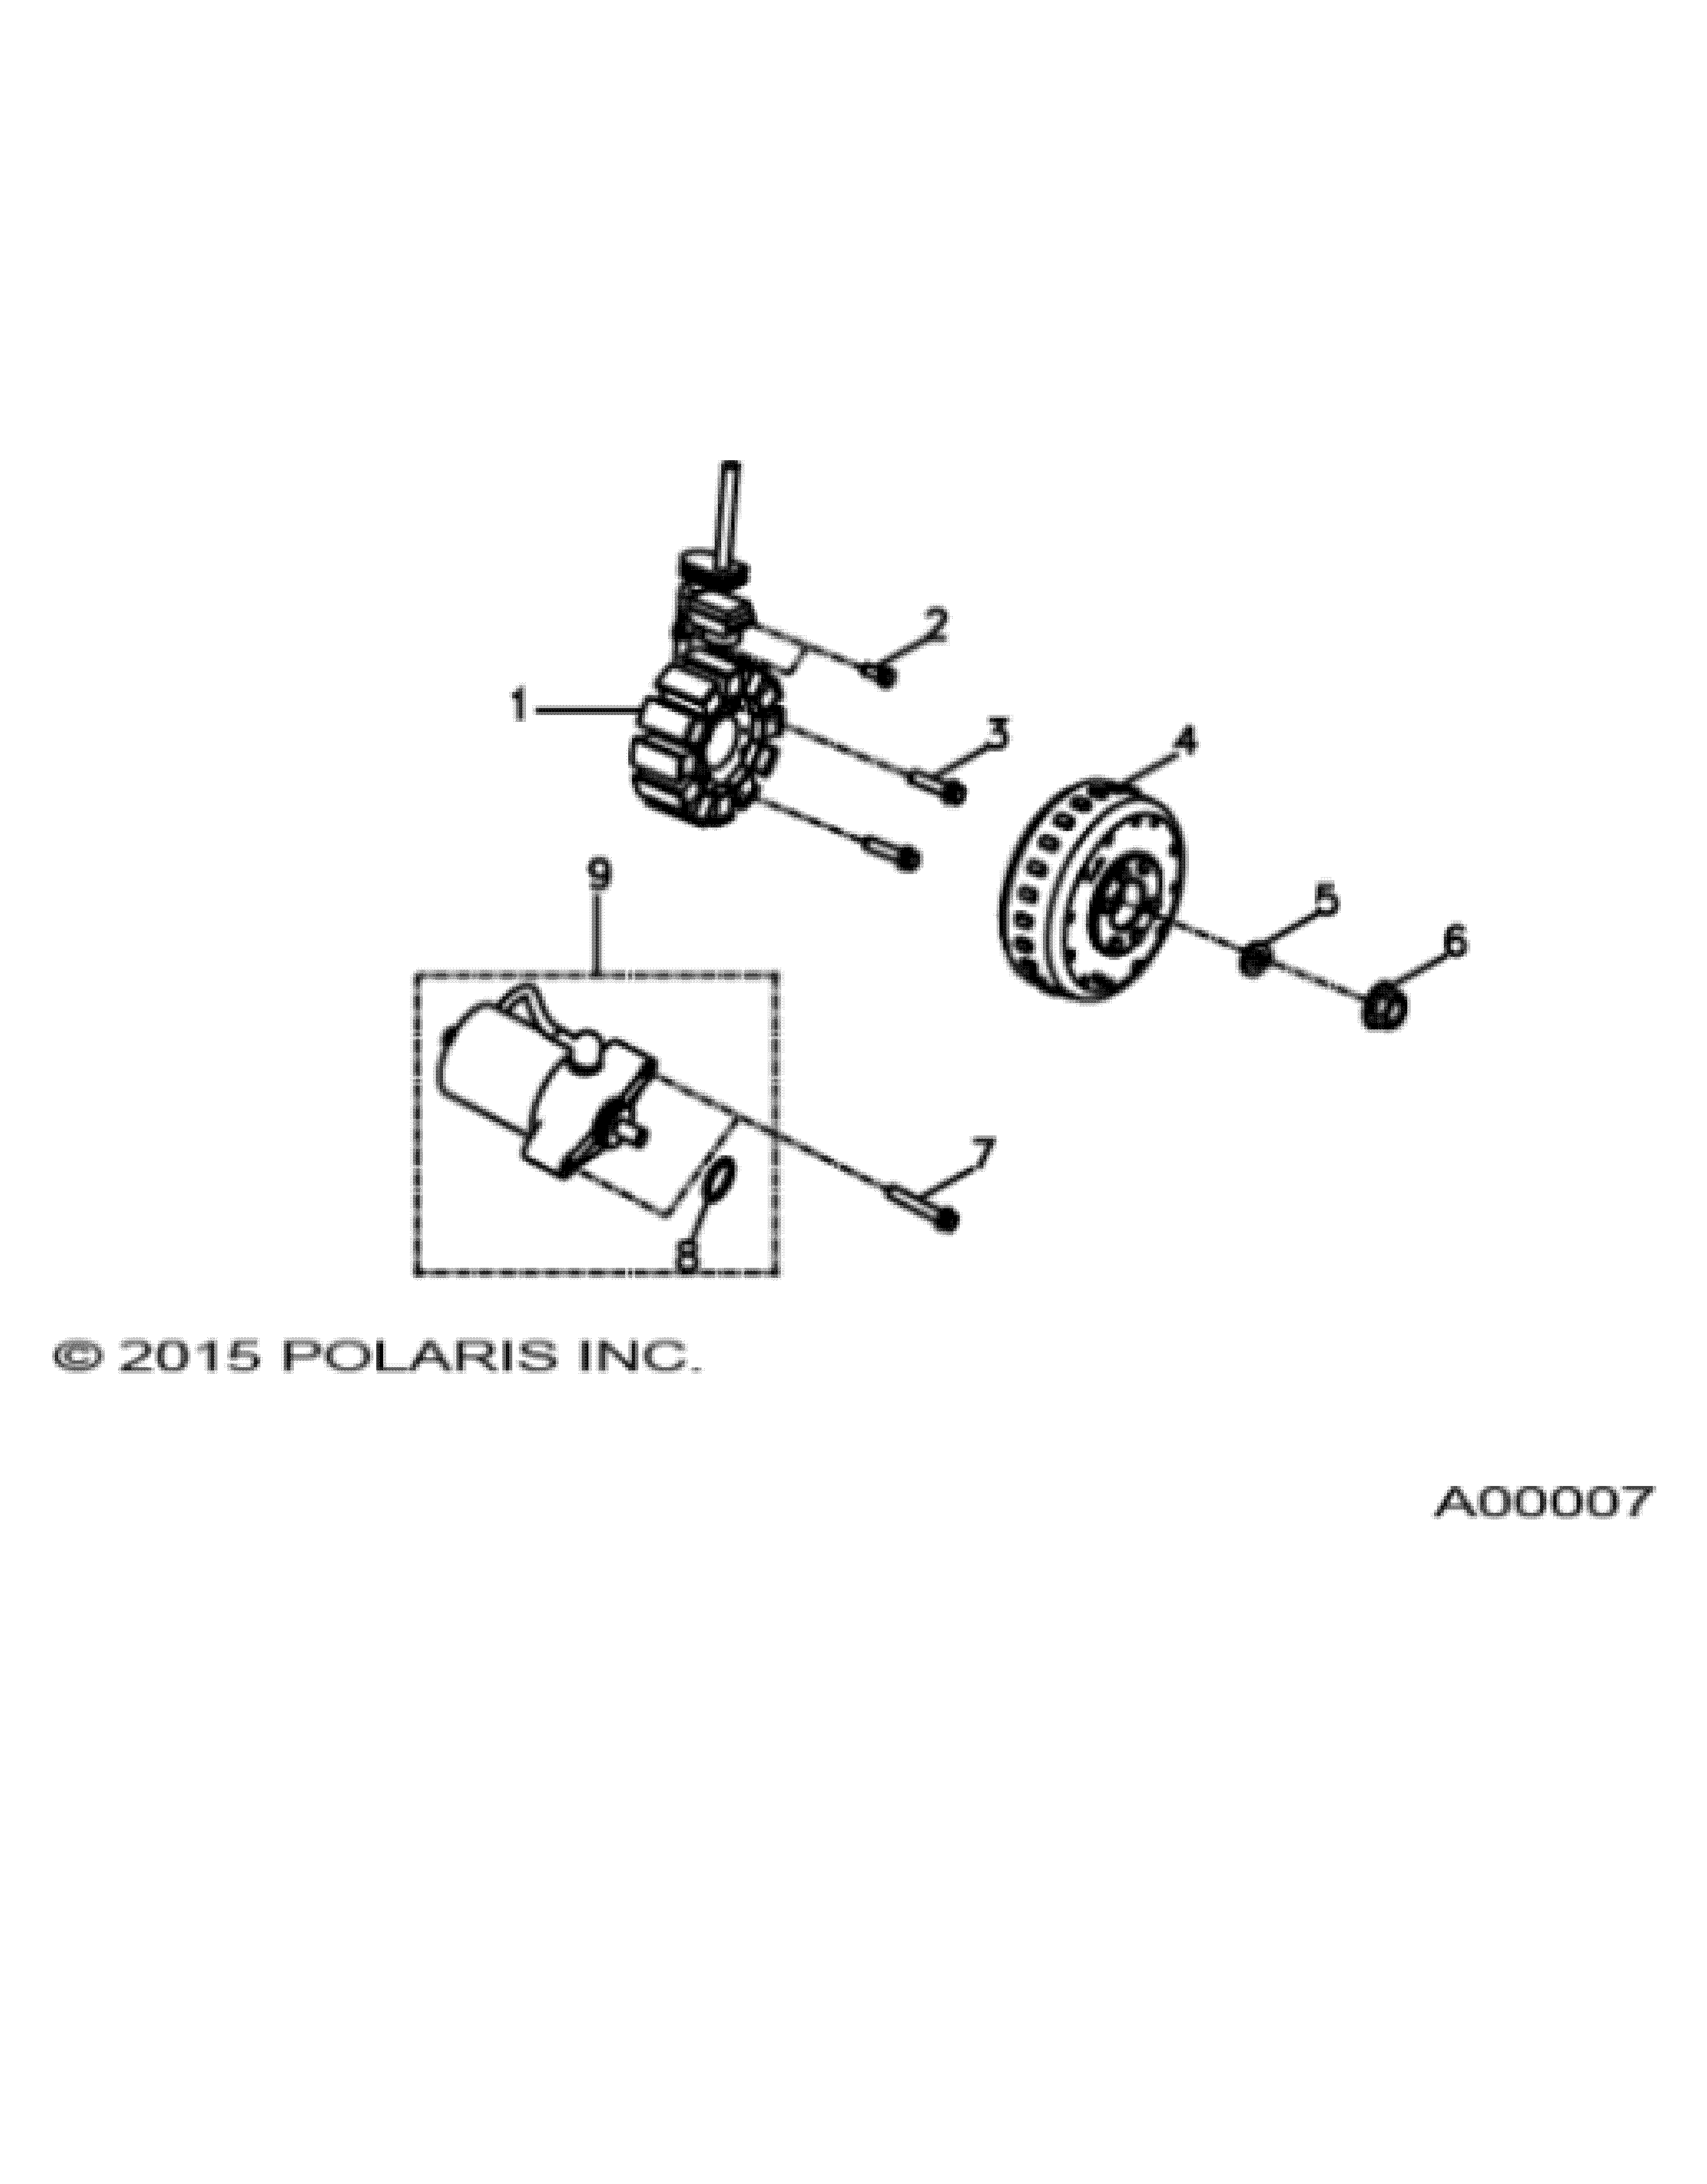 ENGINE STATOR and STARTING MOTOR - A17YAF11A5 / N5 (A00007)